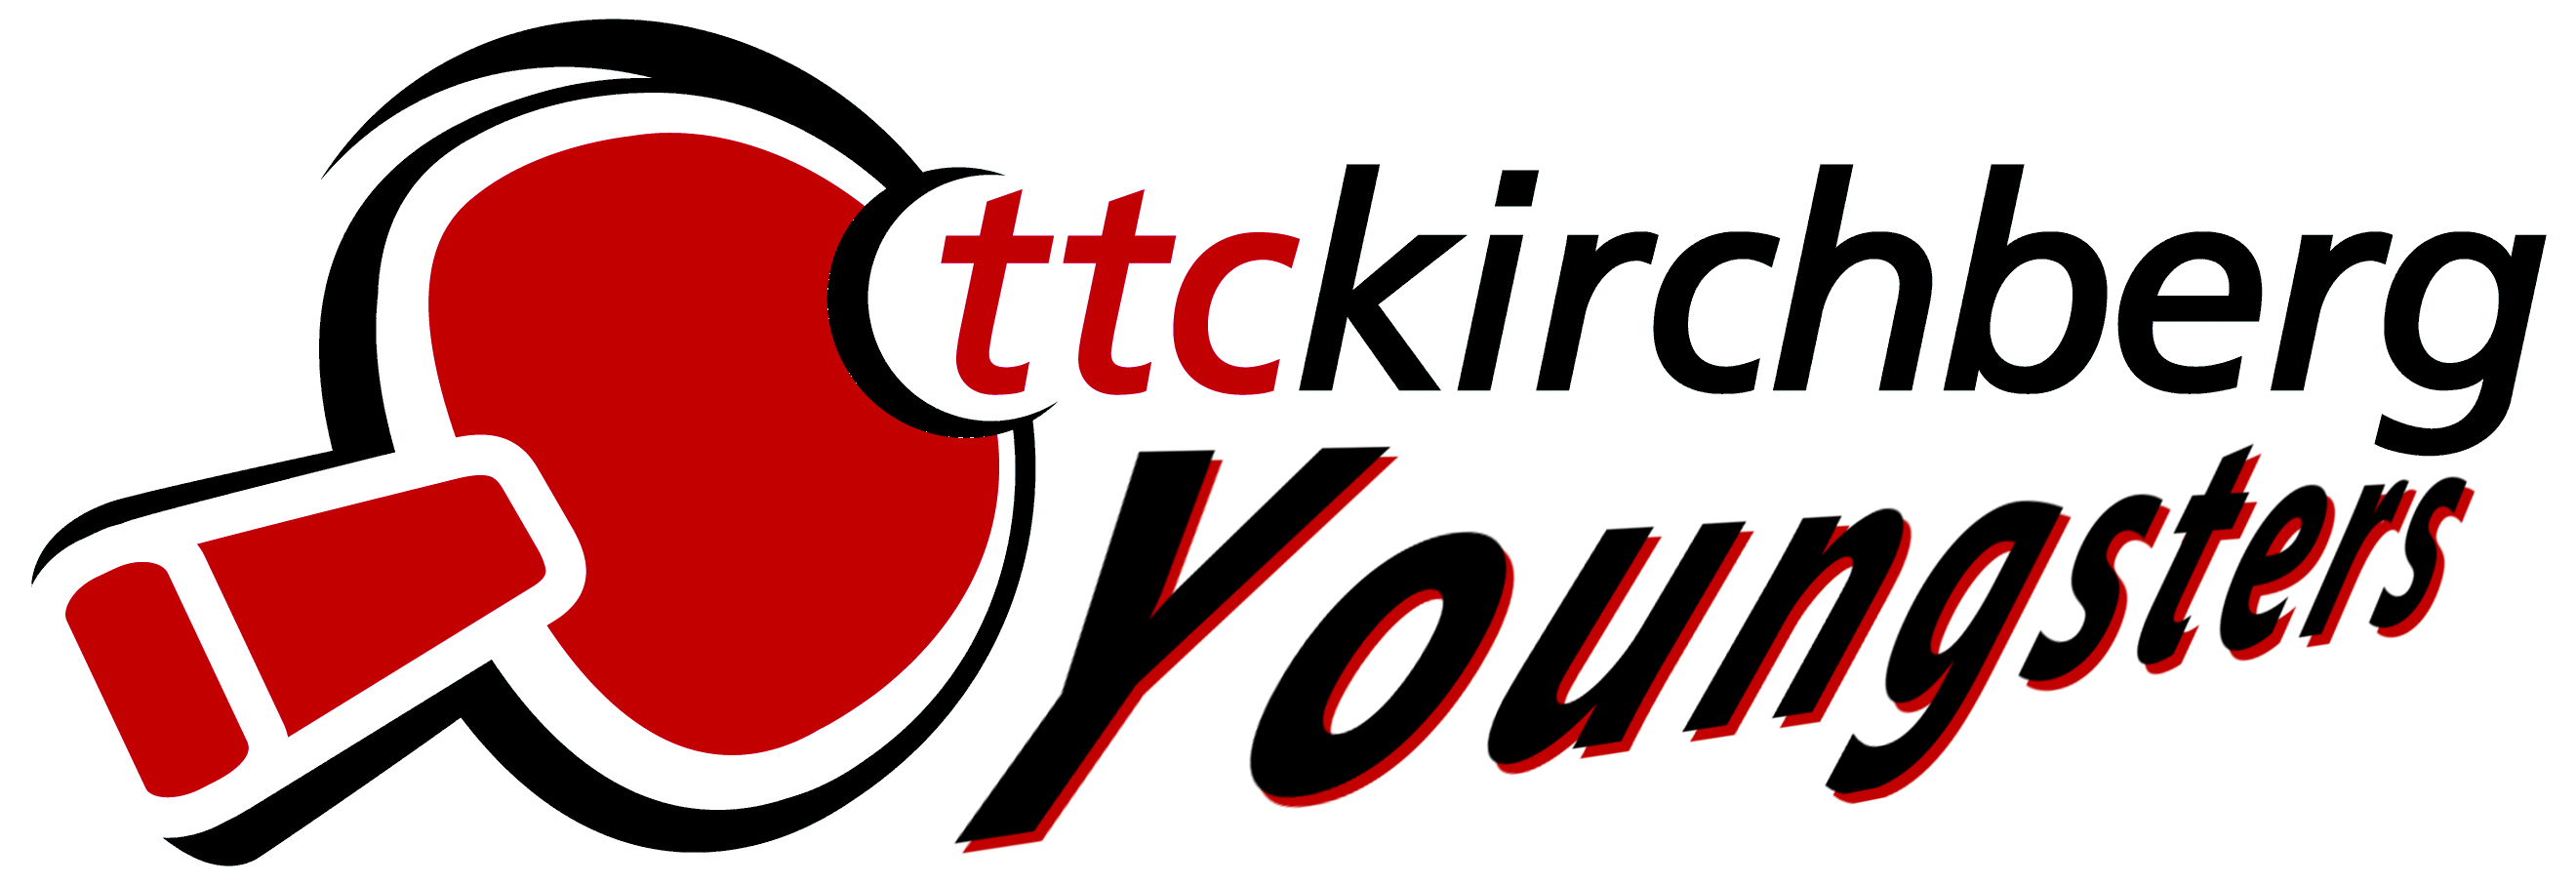 TTC Kirchberg Youngsters unsere Zukunft